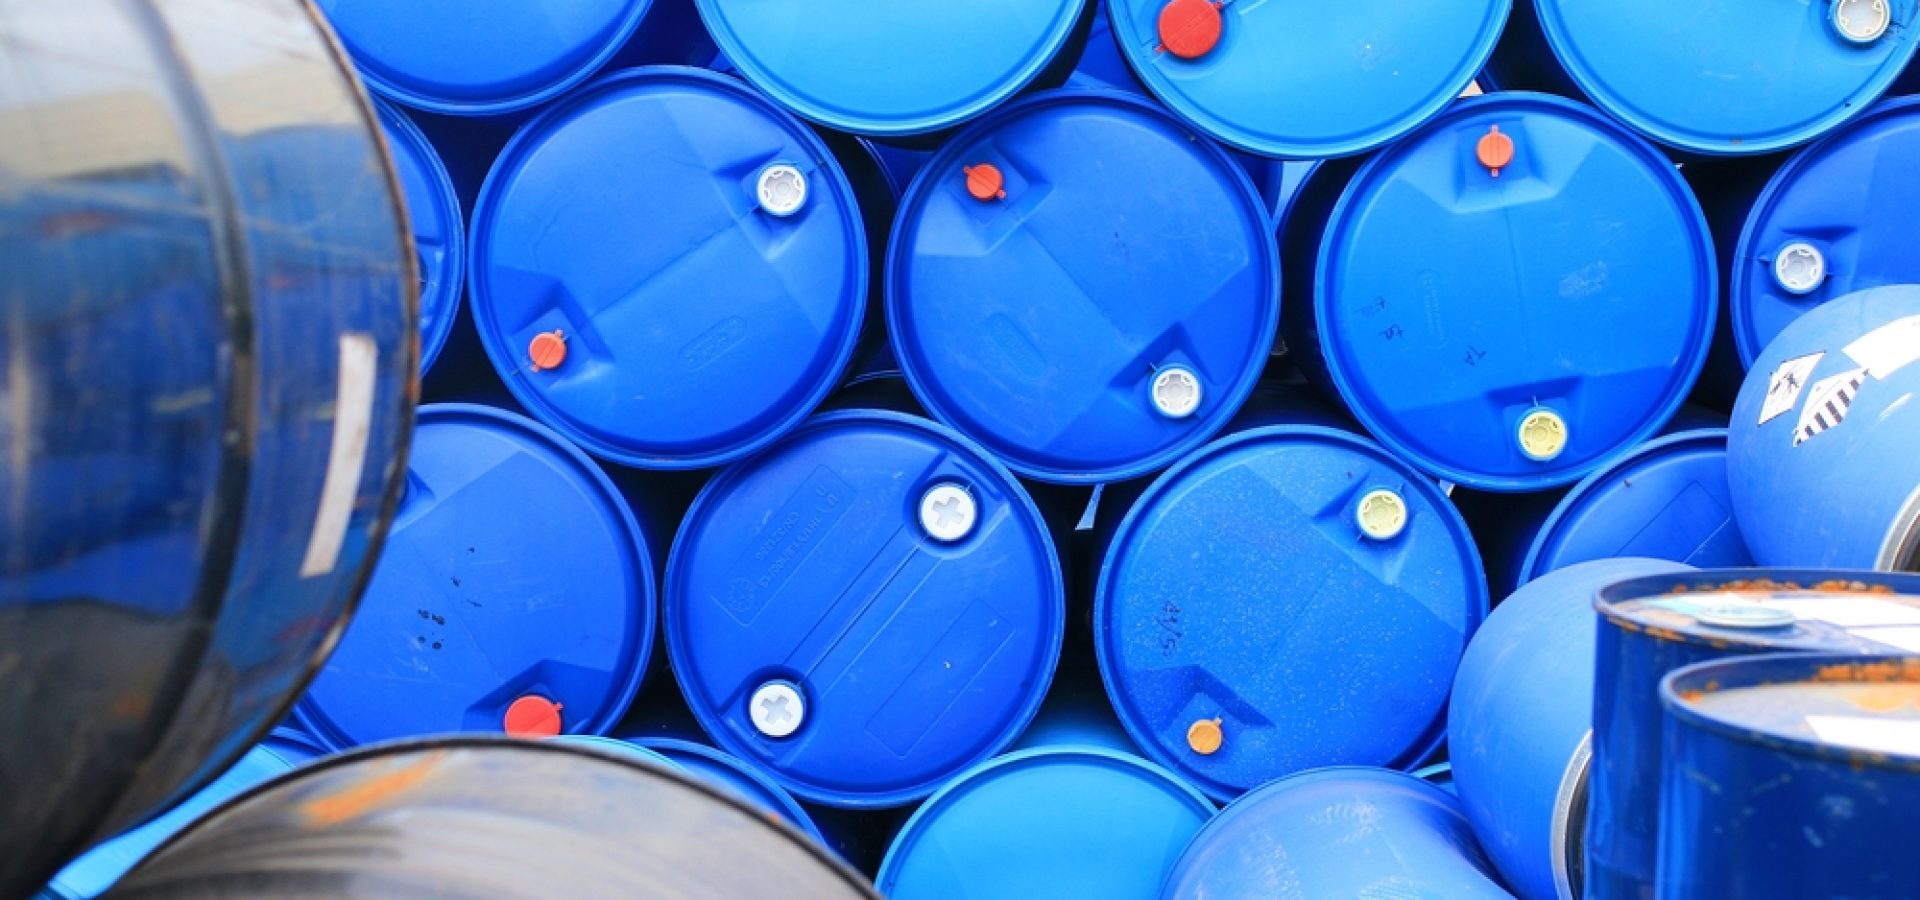 Wibest – Oil and Petroleum: Crude oil barrels stacked up.